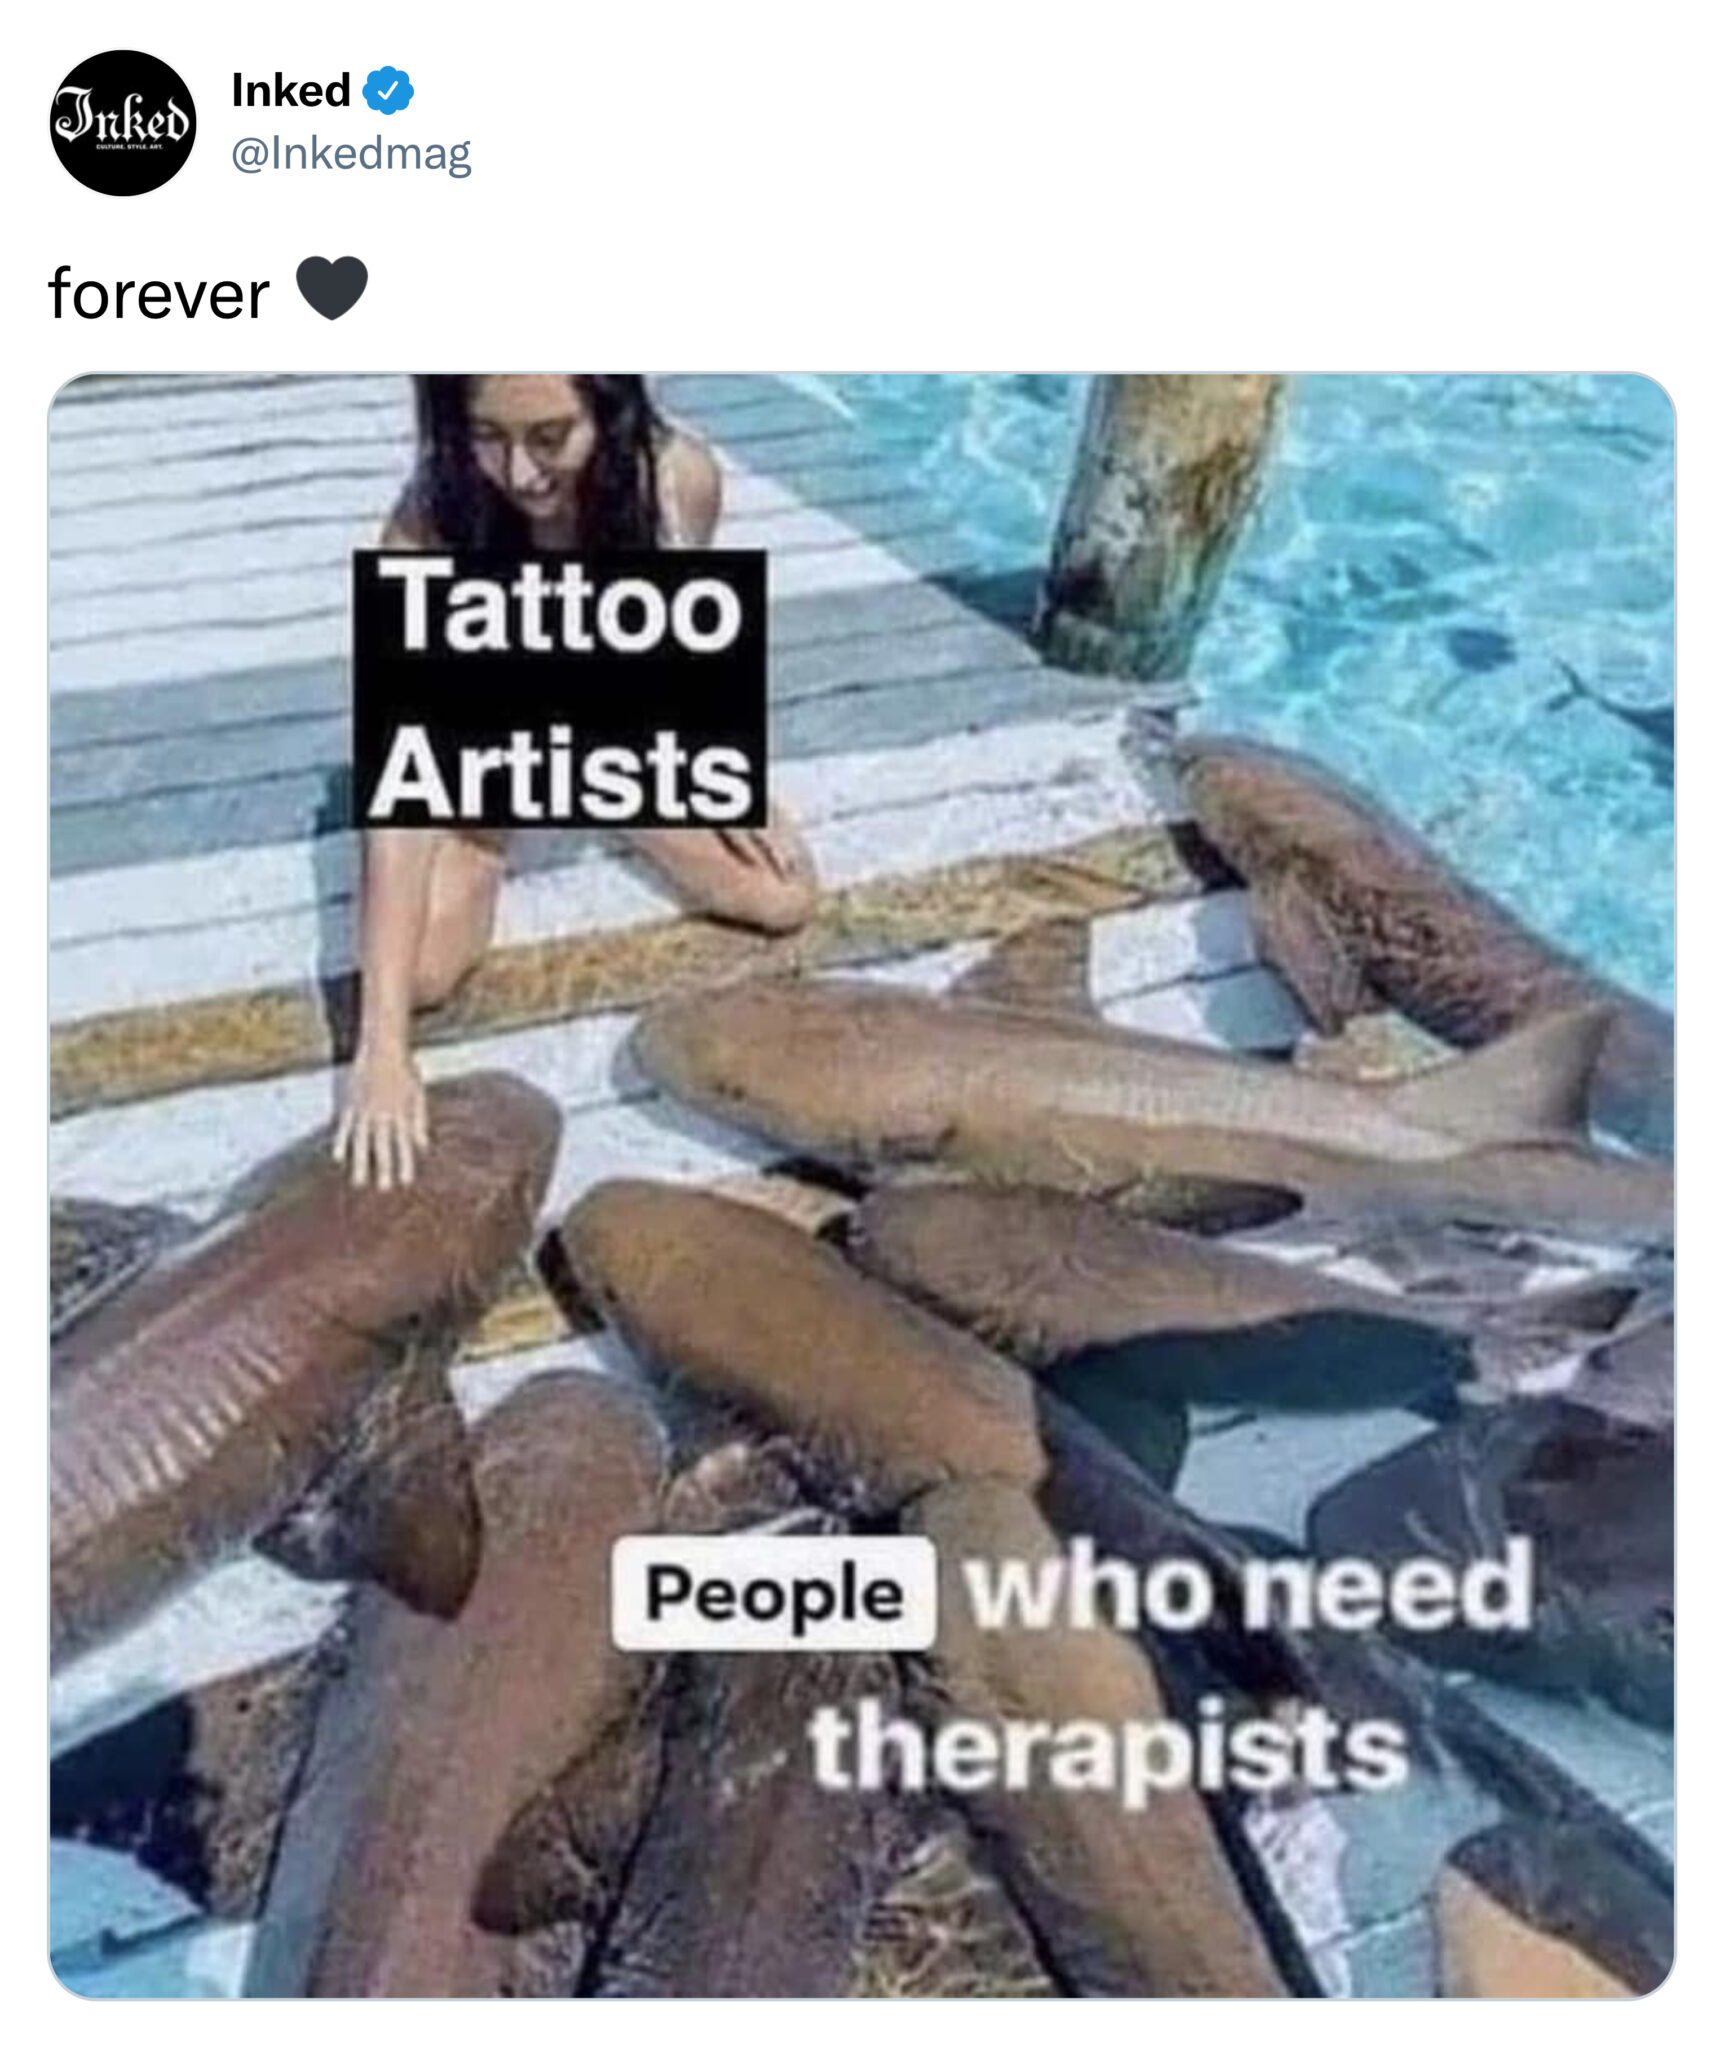 tattoo artist therapy meme - Inked Inked Culture Style Are forever Tattoo Artists People who need therapists